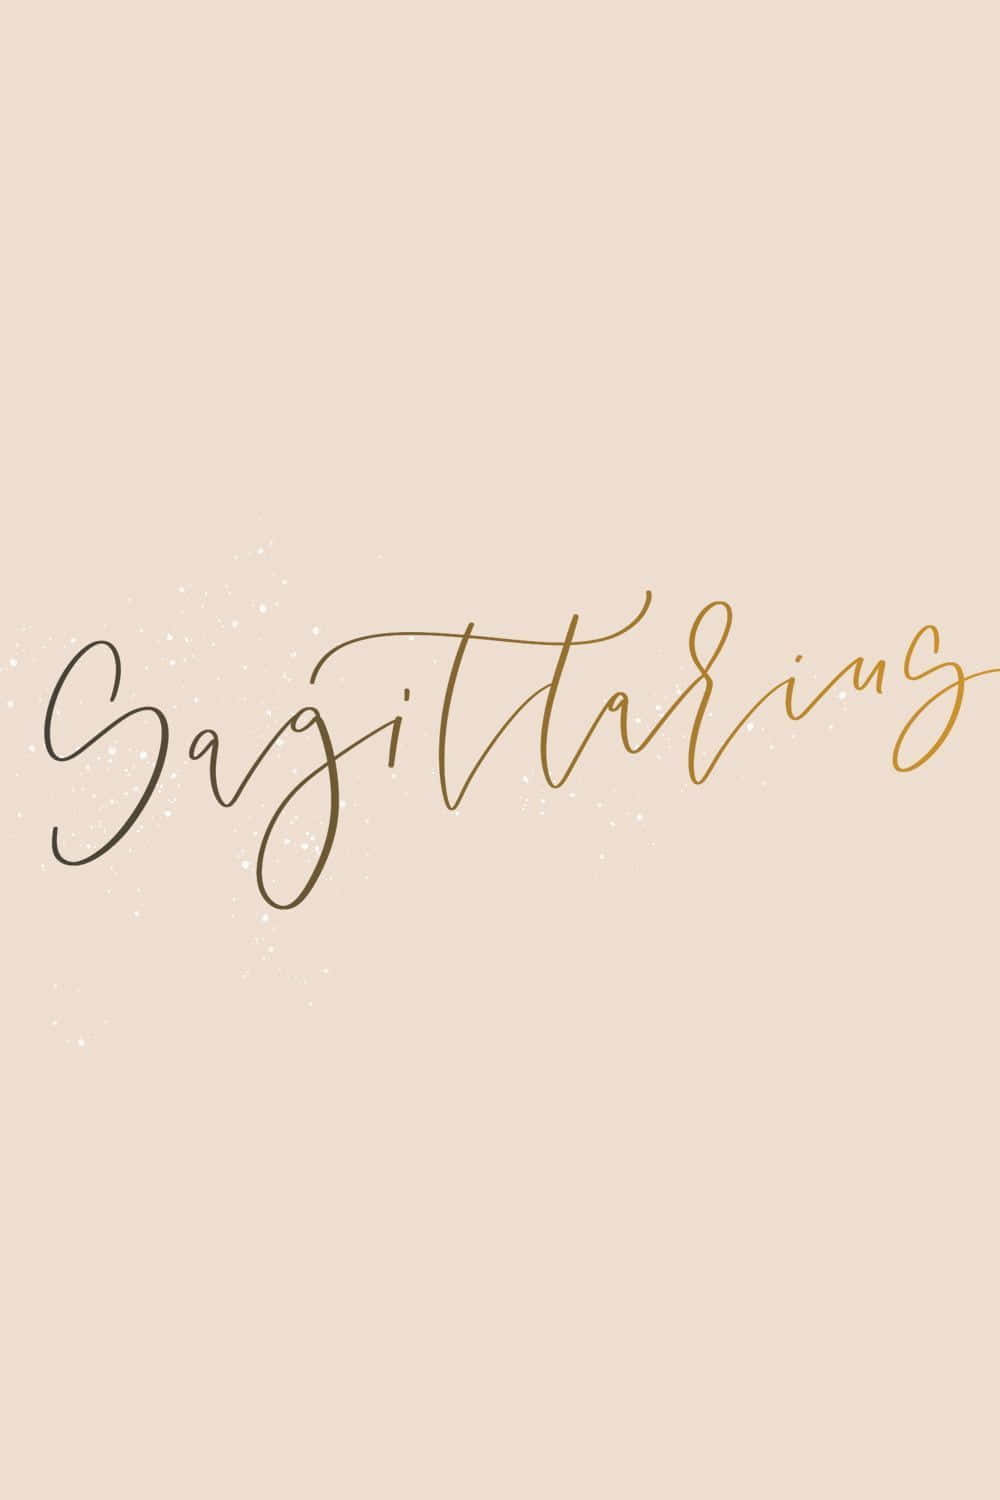 A close up of the word satiating in gold - Sagittarius